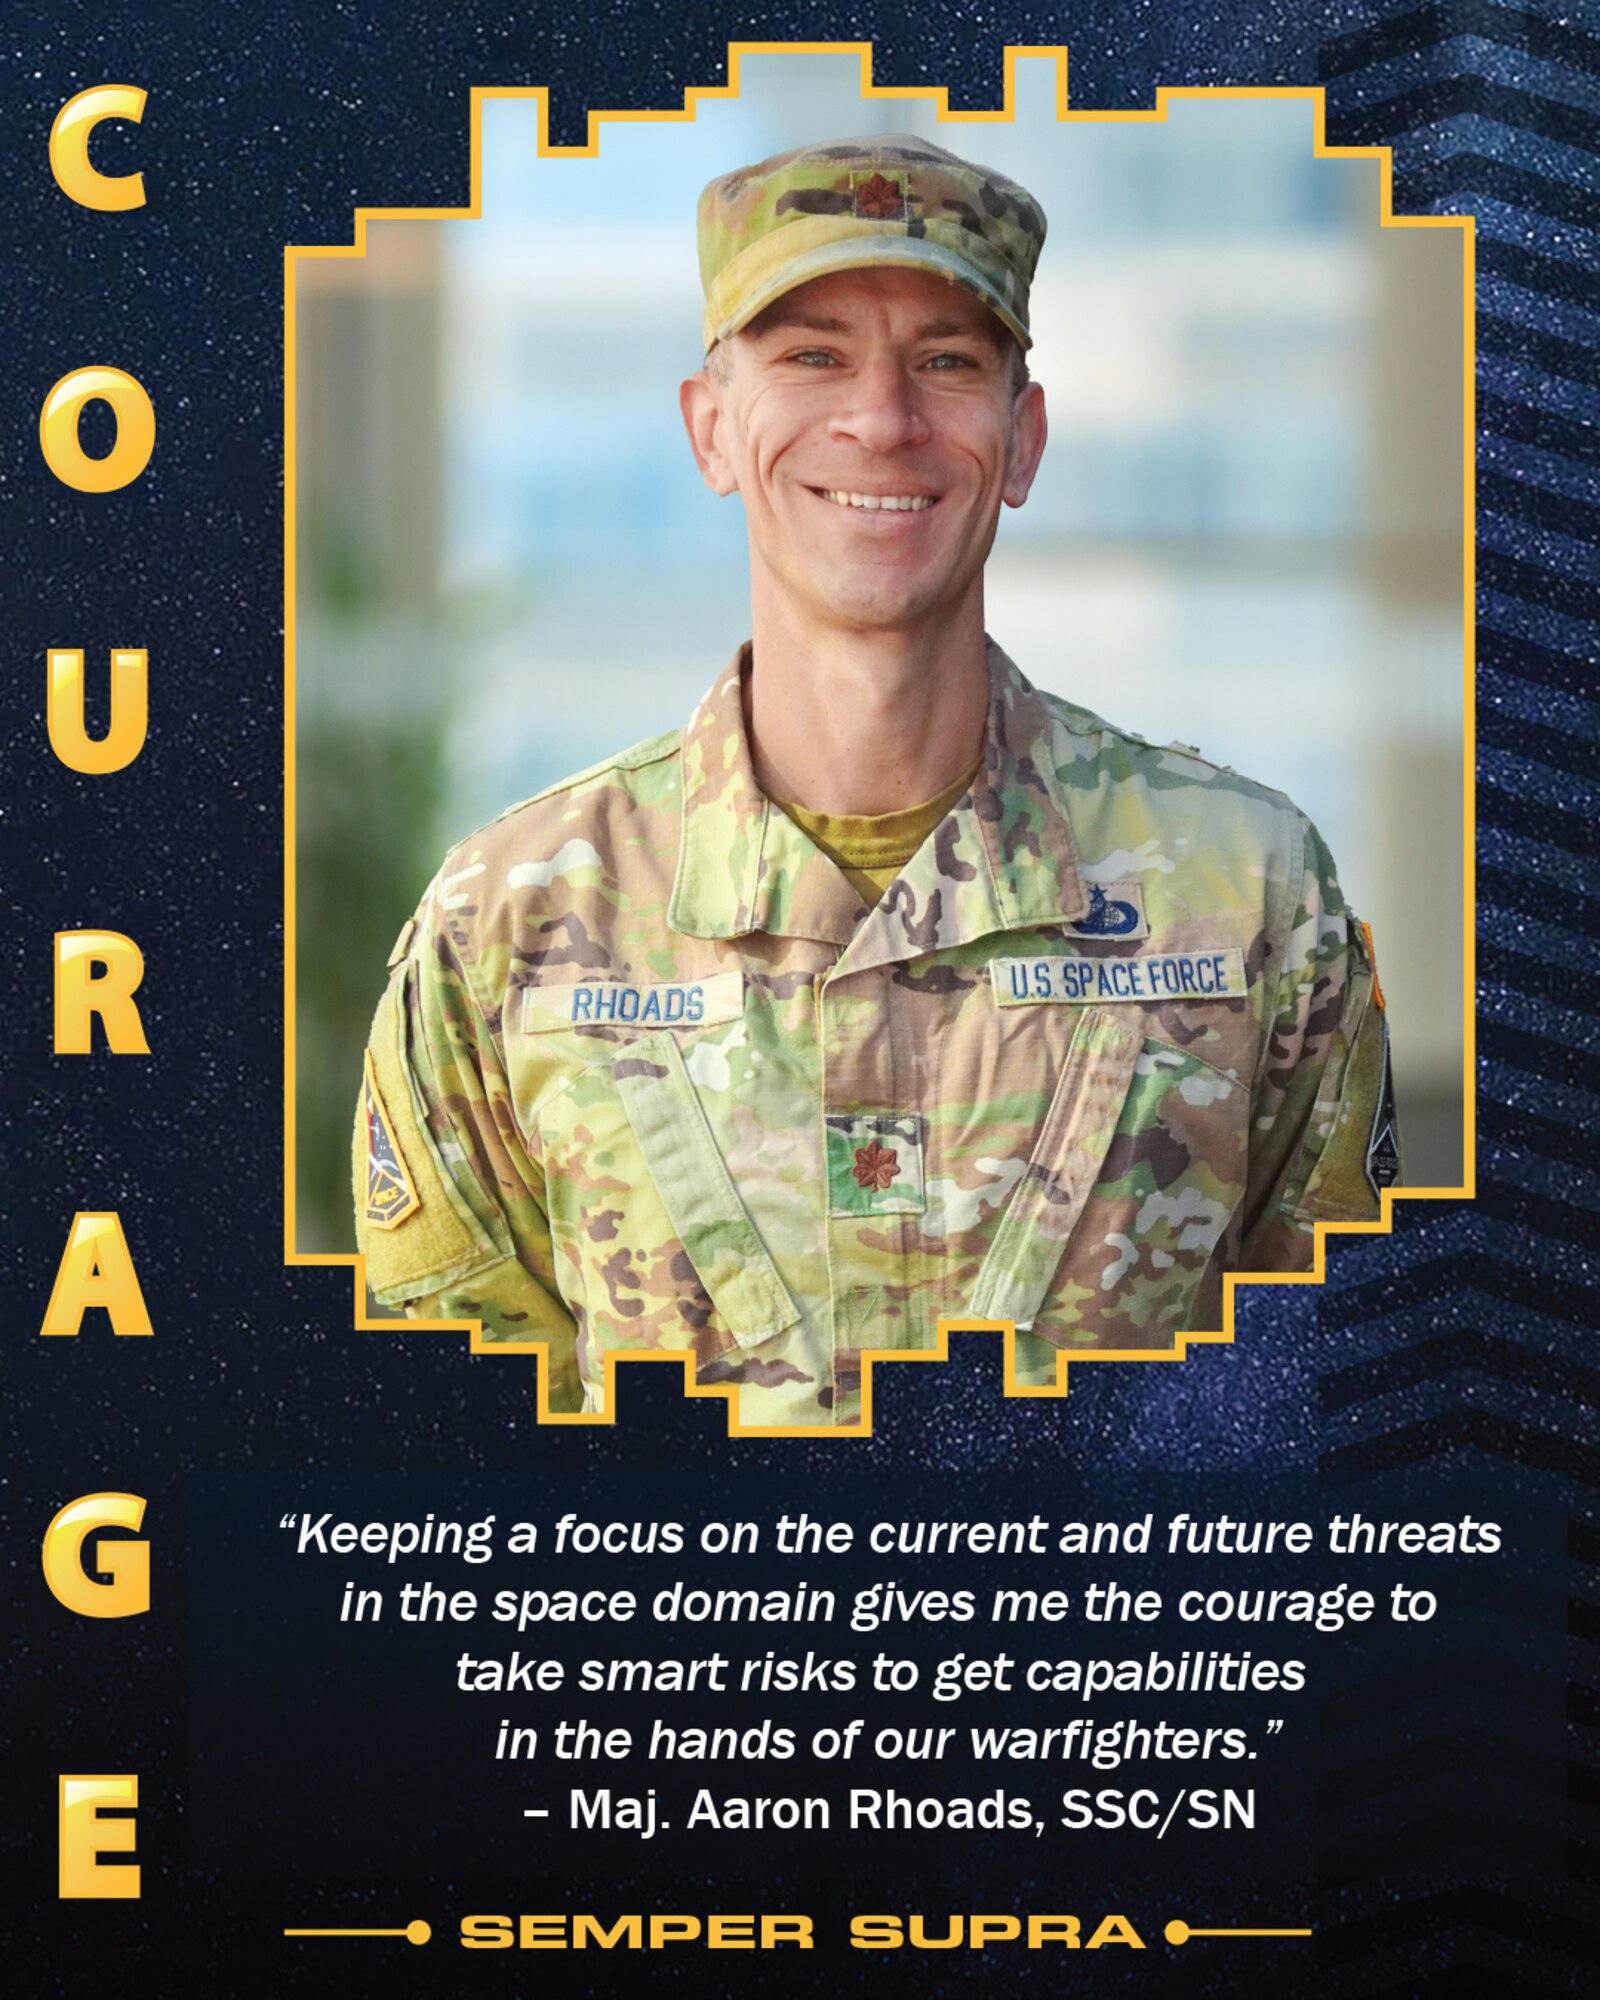 The four United States Space Force (USSF) Core Values were featured on posters displayed at the USSF’s third birthday celebration held Dec. 20 on Los Angeles Air Force Base. Courage, the fourth USSF Core Value, is represented by Maj. Aaron Rhoads, who is part of the Space Sensing Program Executive Office for Space Systems Command. To Rhoads, Courage is “keeping a focus on the current and future threats in the space domain gives me the courage to take smart risks to get capabilities in the hands of our warfighters."